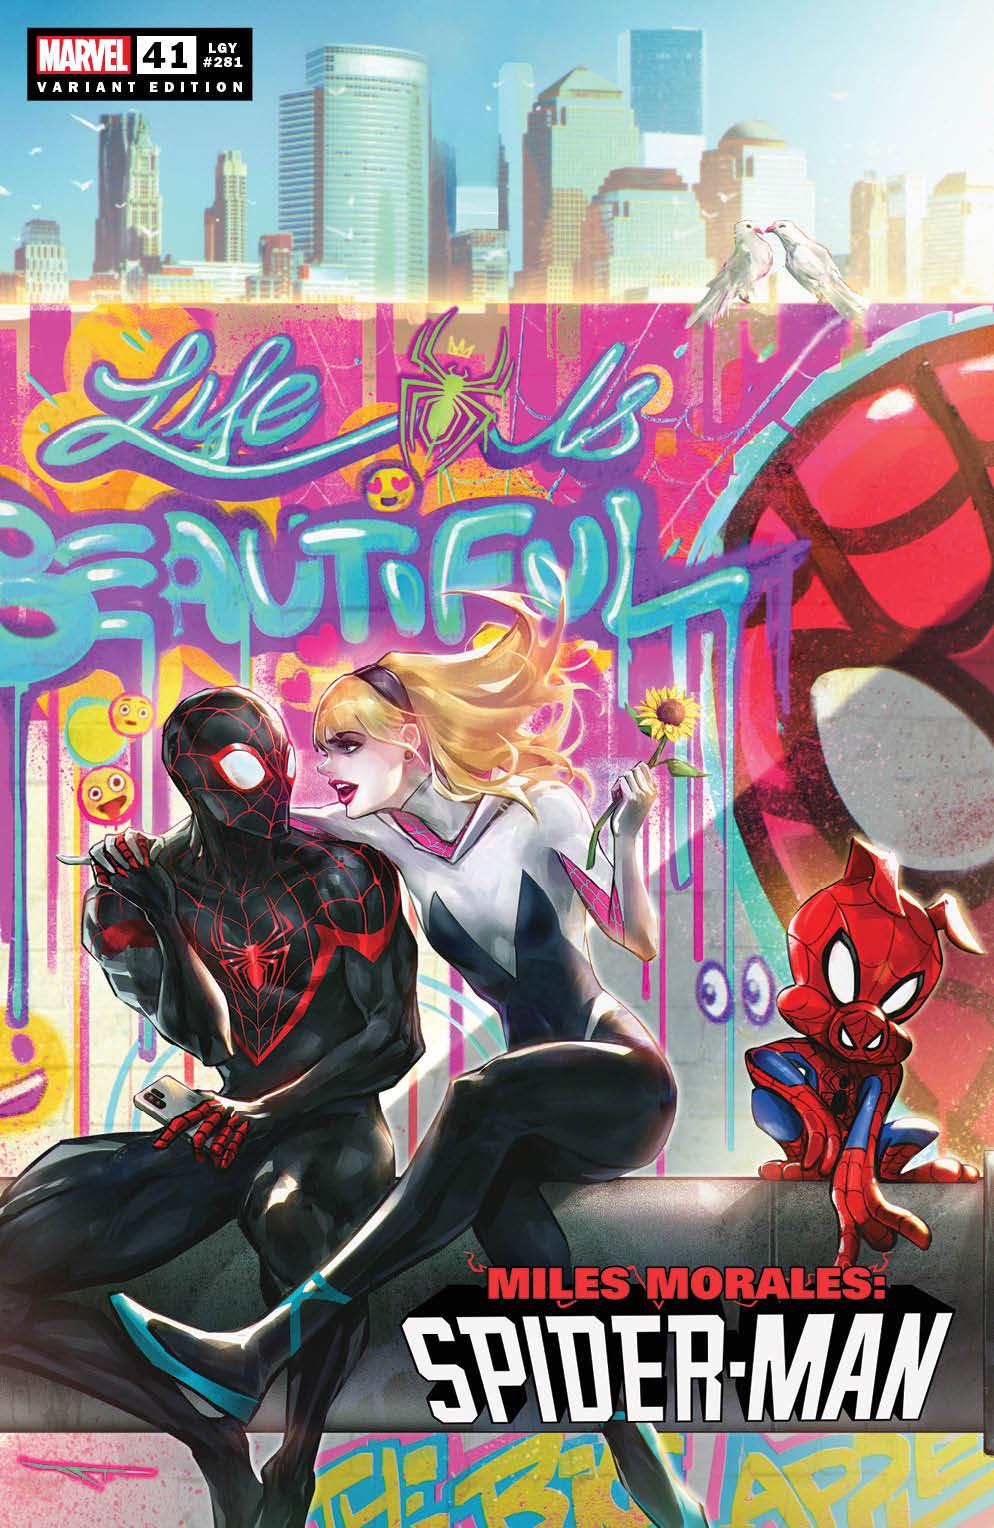 MILES MORALES SPIDER-MAN #41 IVAN TAO LIFE IS BEAUTIFUL VARIANT LIMITED TO 3000 COPIES